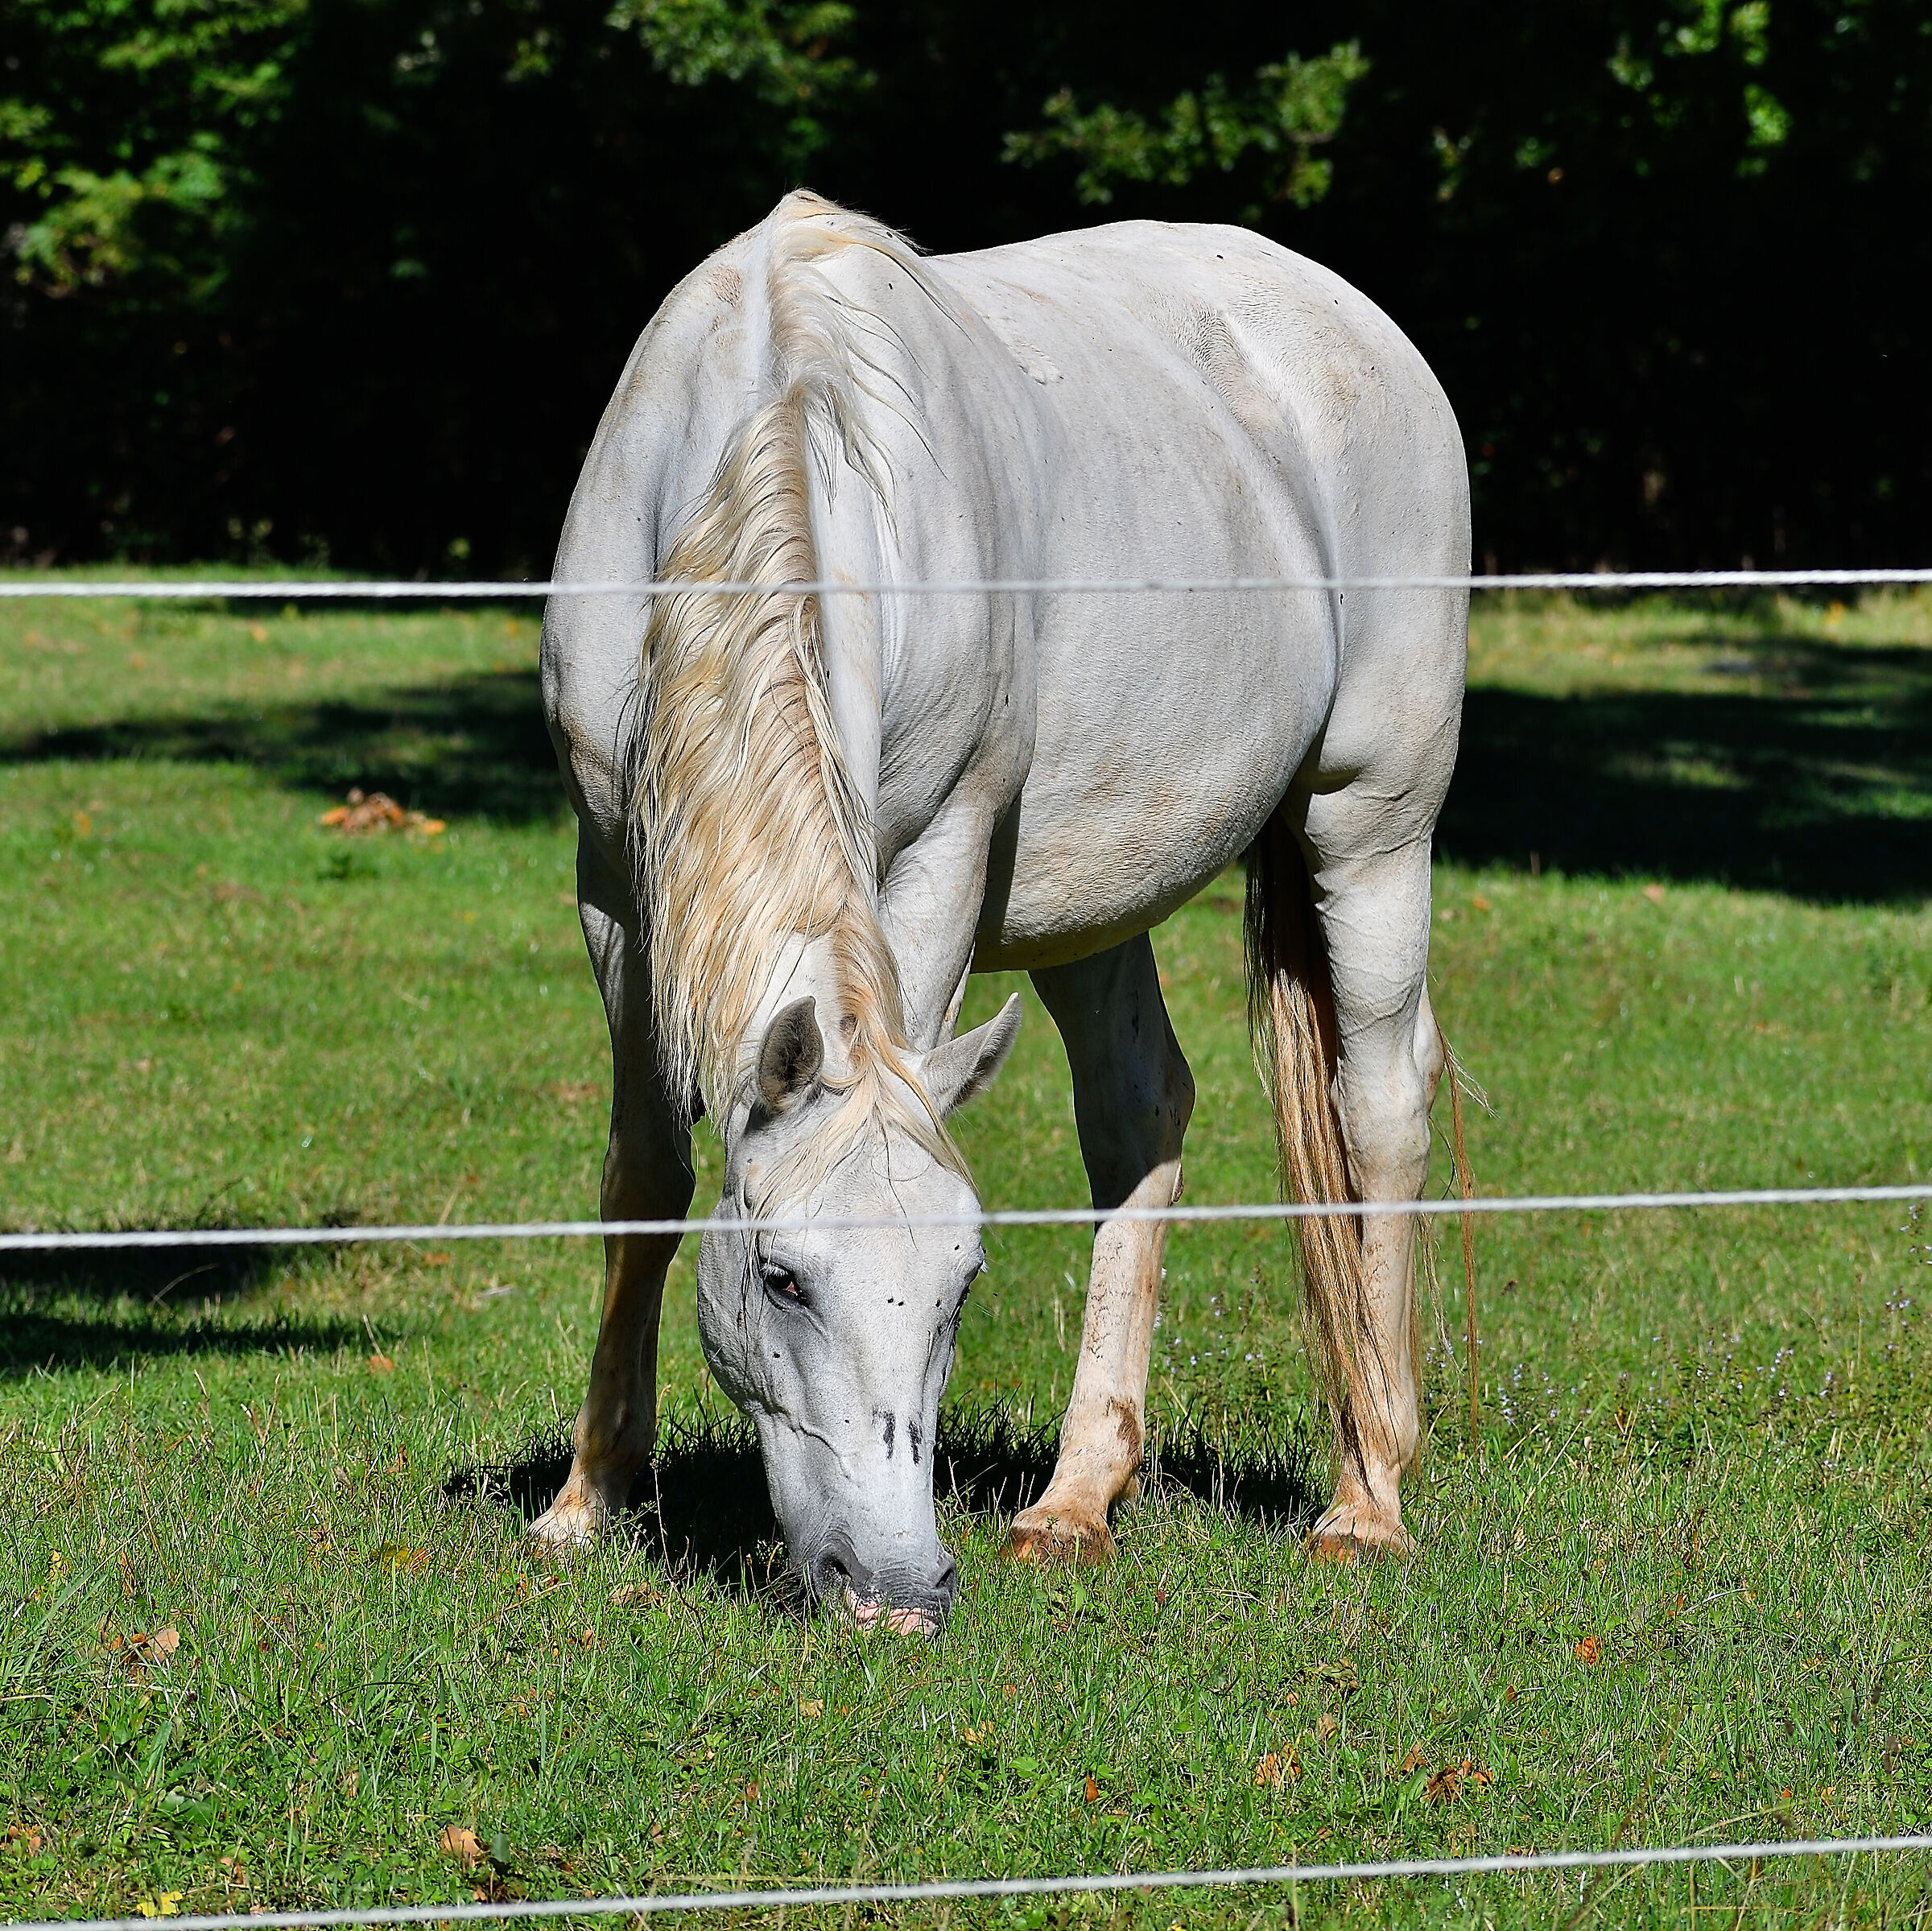 Lipid horse, behind the fence...